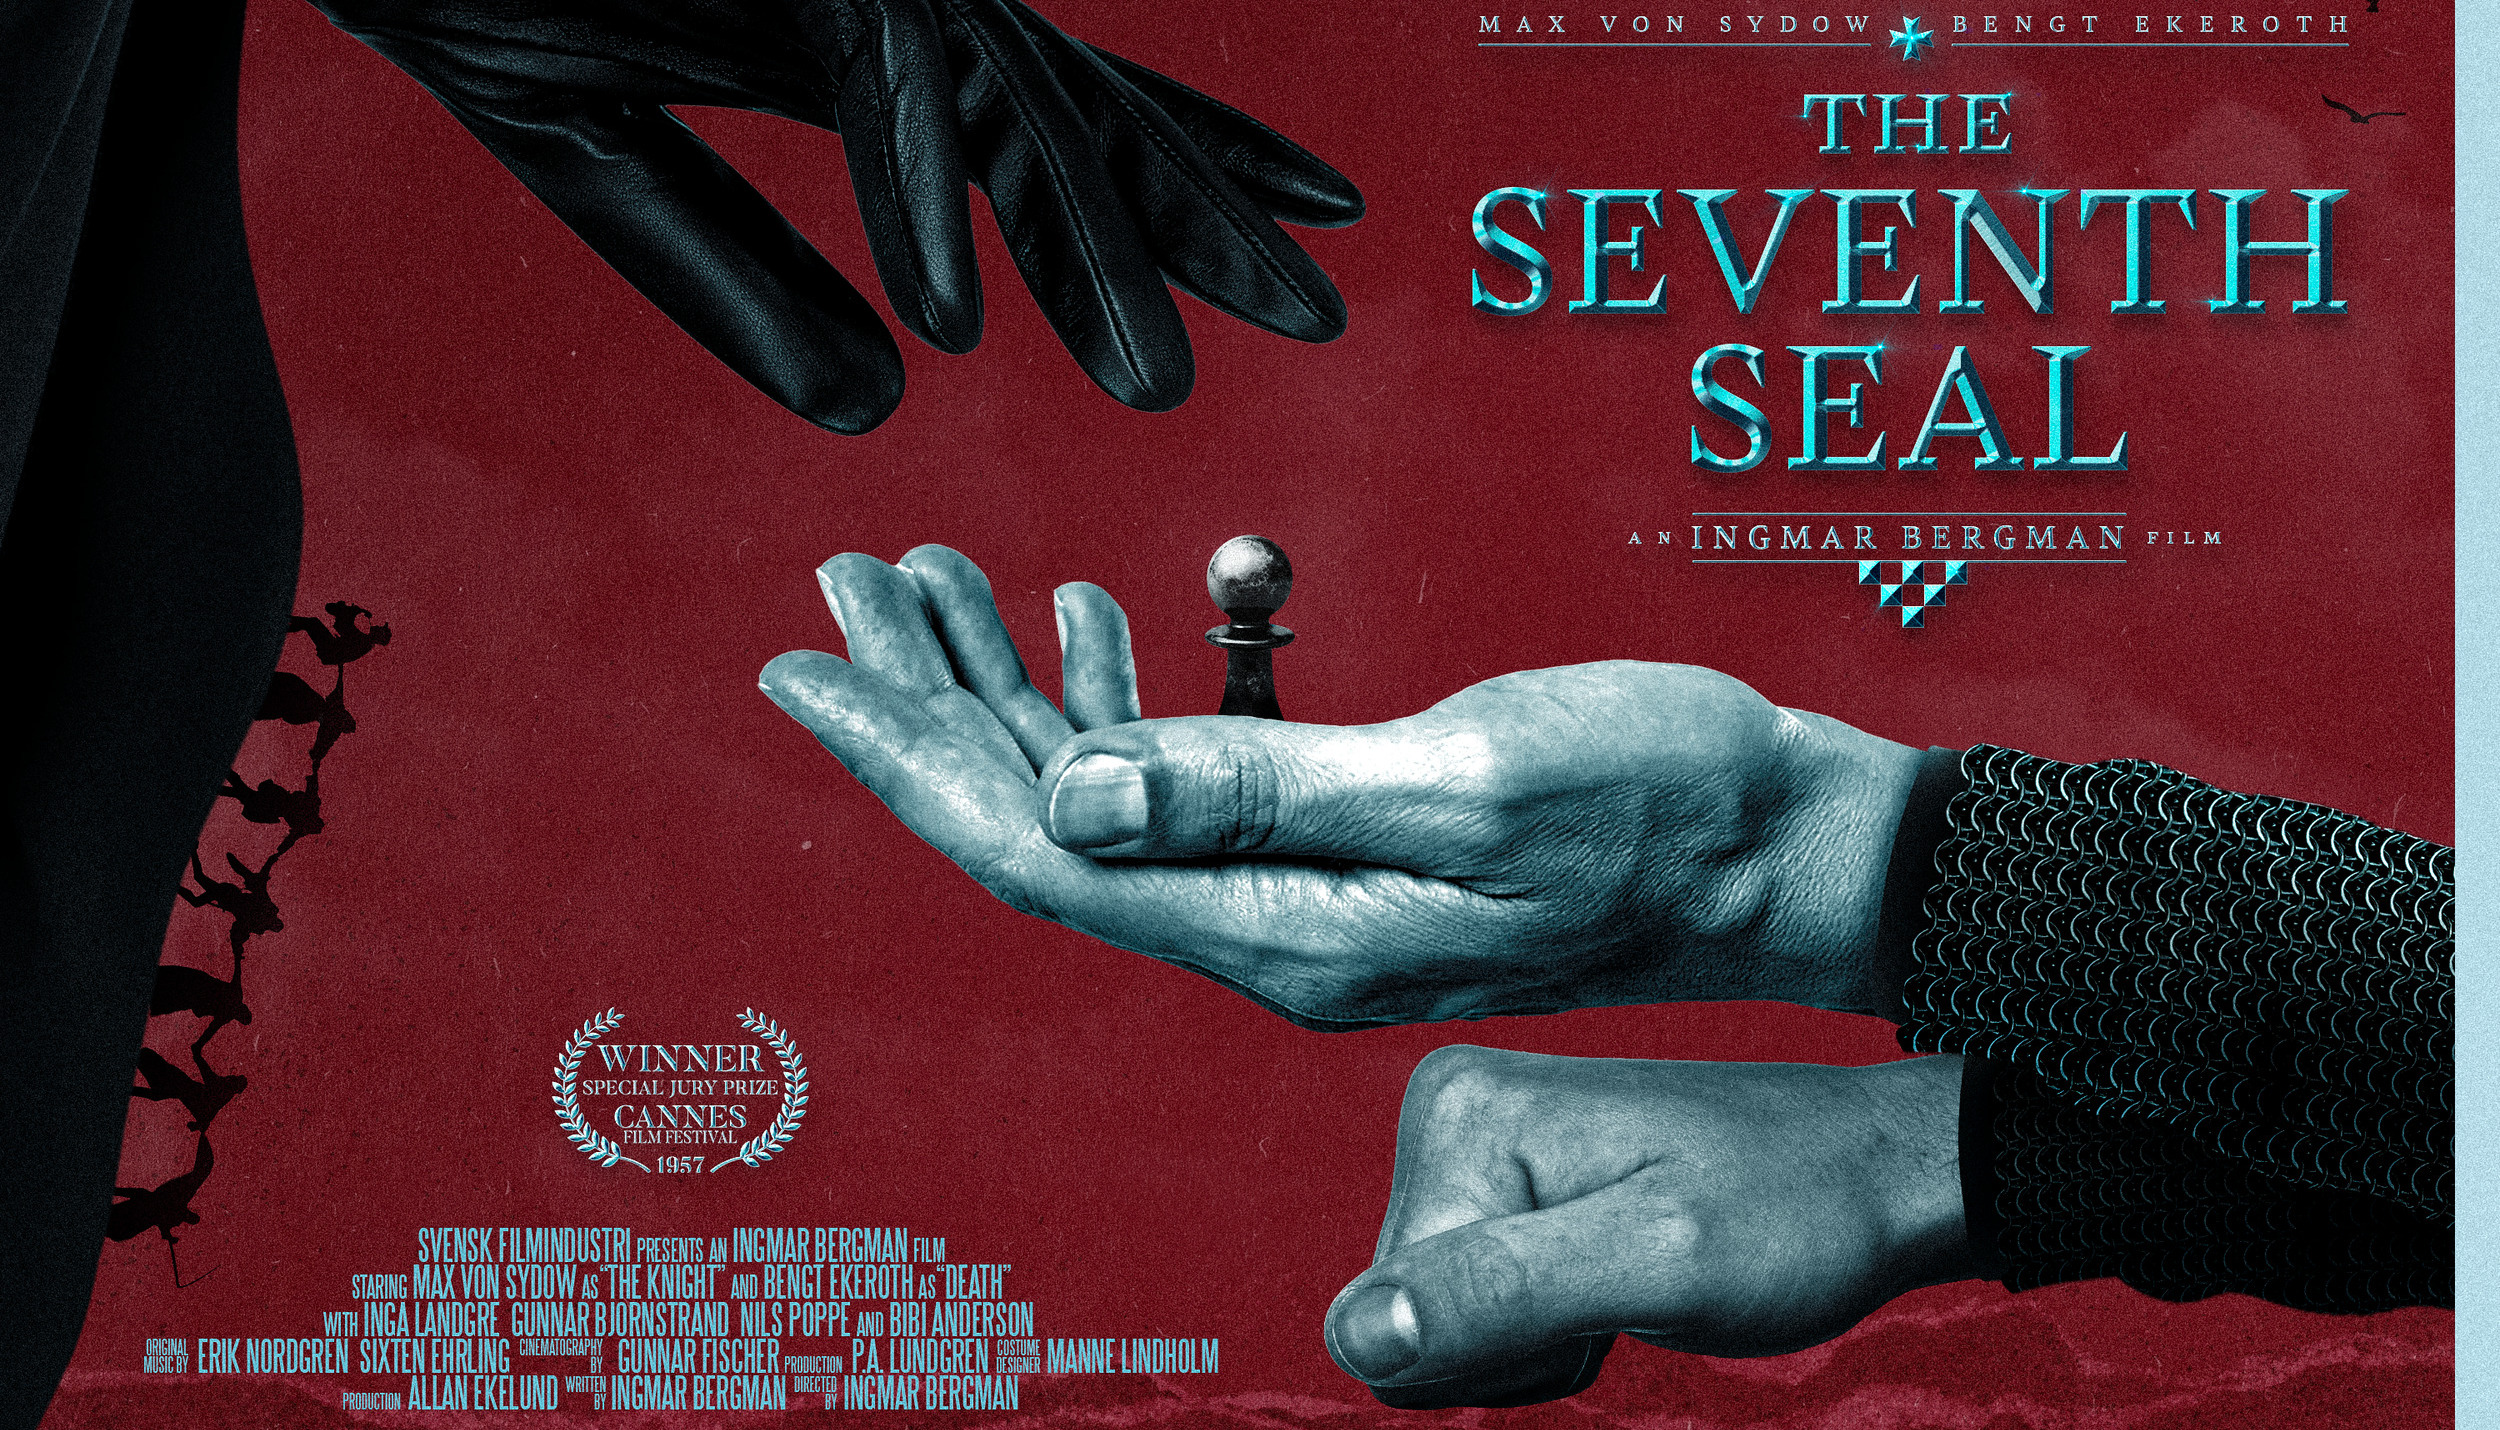 33-facts-about-the-movie-the-seventh-seal